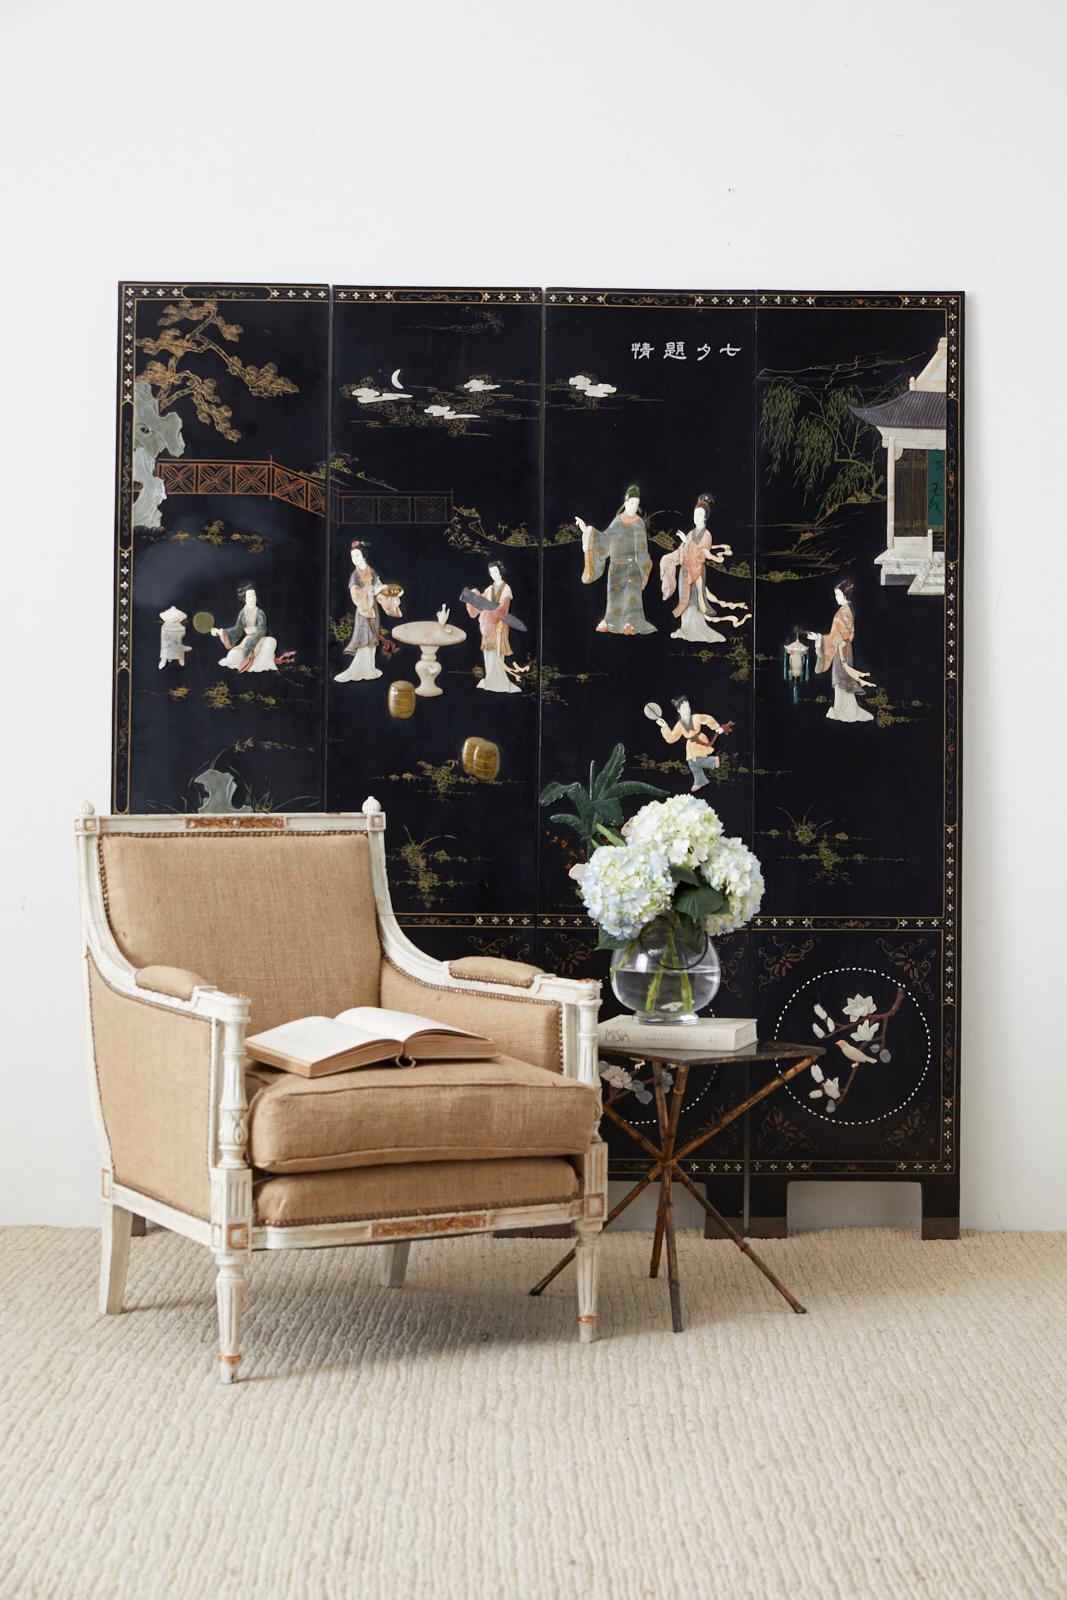 Impressive Chinese export coromandel style four panel screen featuring hand-carved soapstone beauties in a pagoda landscape. The bottom of the screen has round windows decorated with carved flora and fauna scenes. The entire front is bordered with